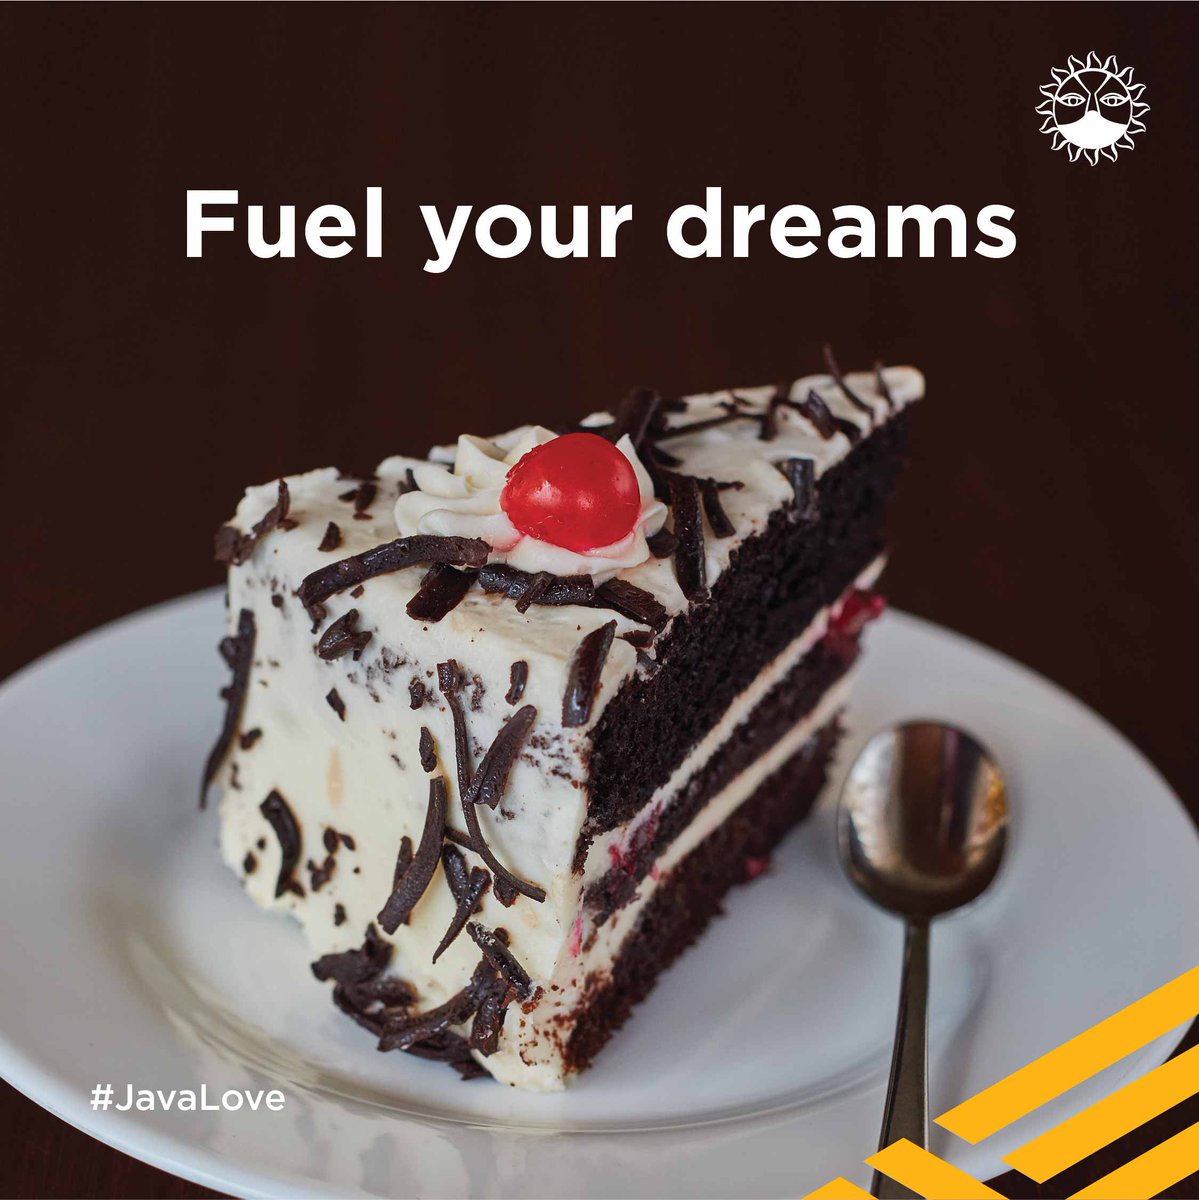 Bring the classic taste of #BlackForestCake home with you. What's you go-to Java bakery item? #JavaLove